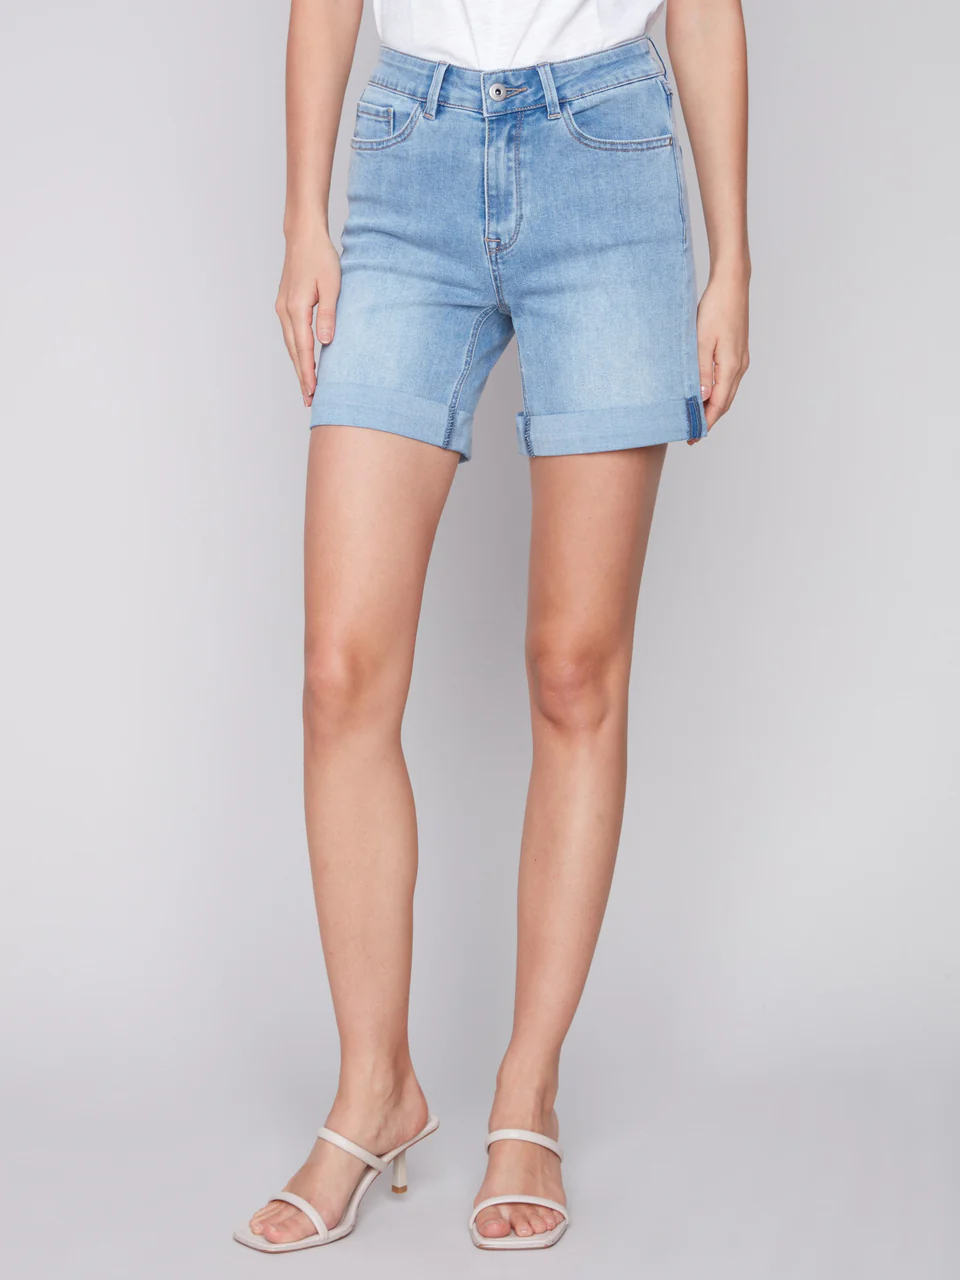 Charlie B Cuffed Hem Denim Shorts - Pale Blue Clothing - Bottoms - Other Bottoms - Shorts by Charlie B | Grace the Boutique